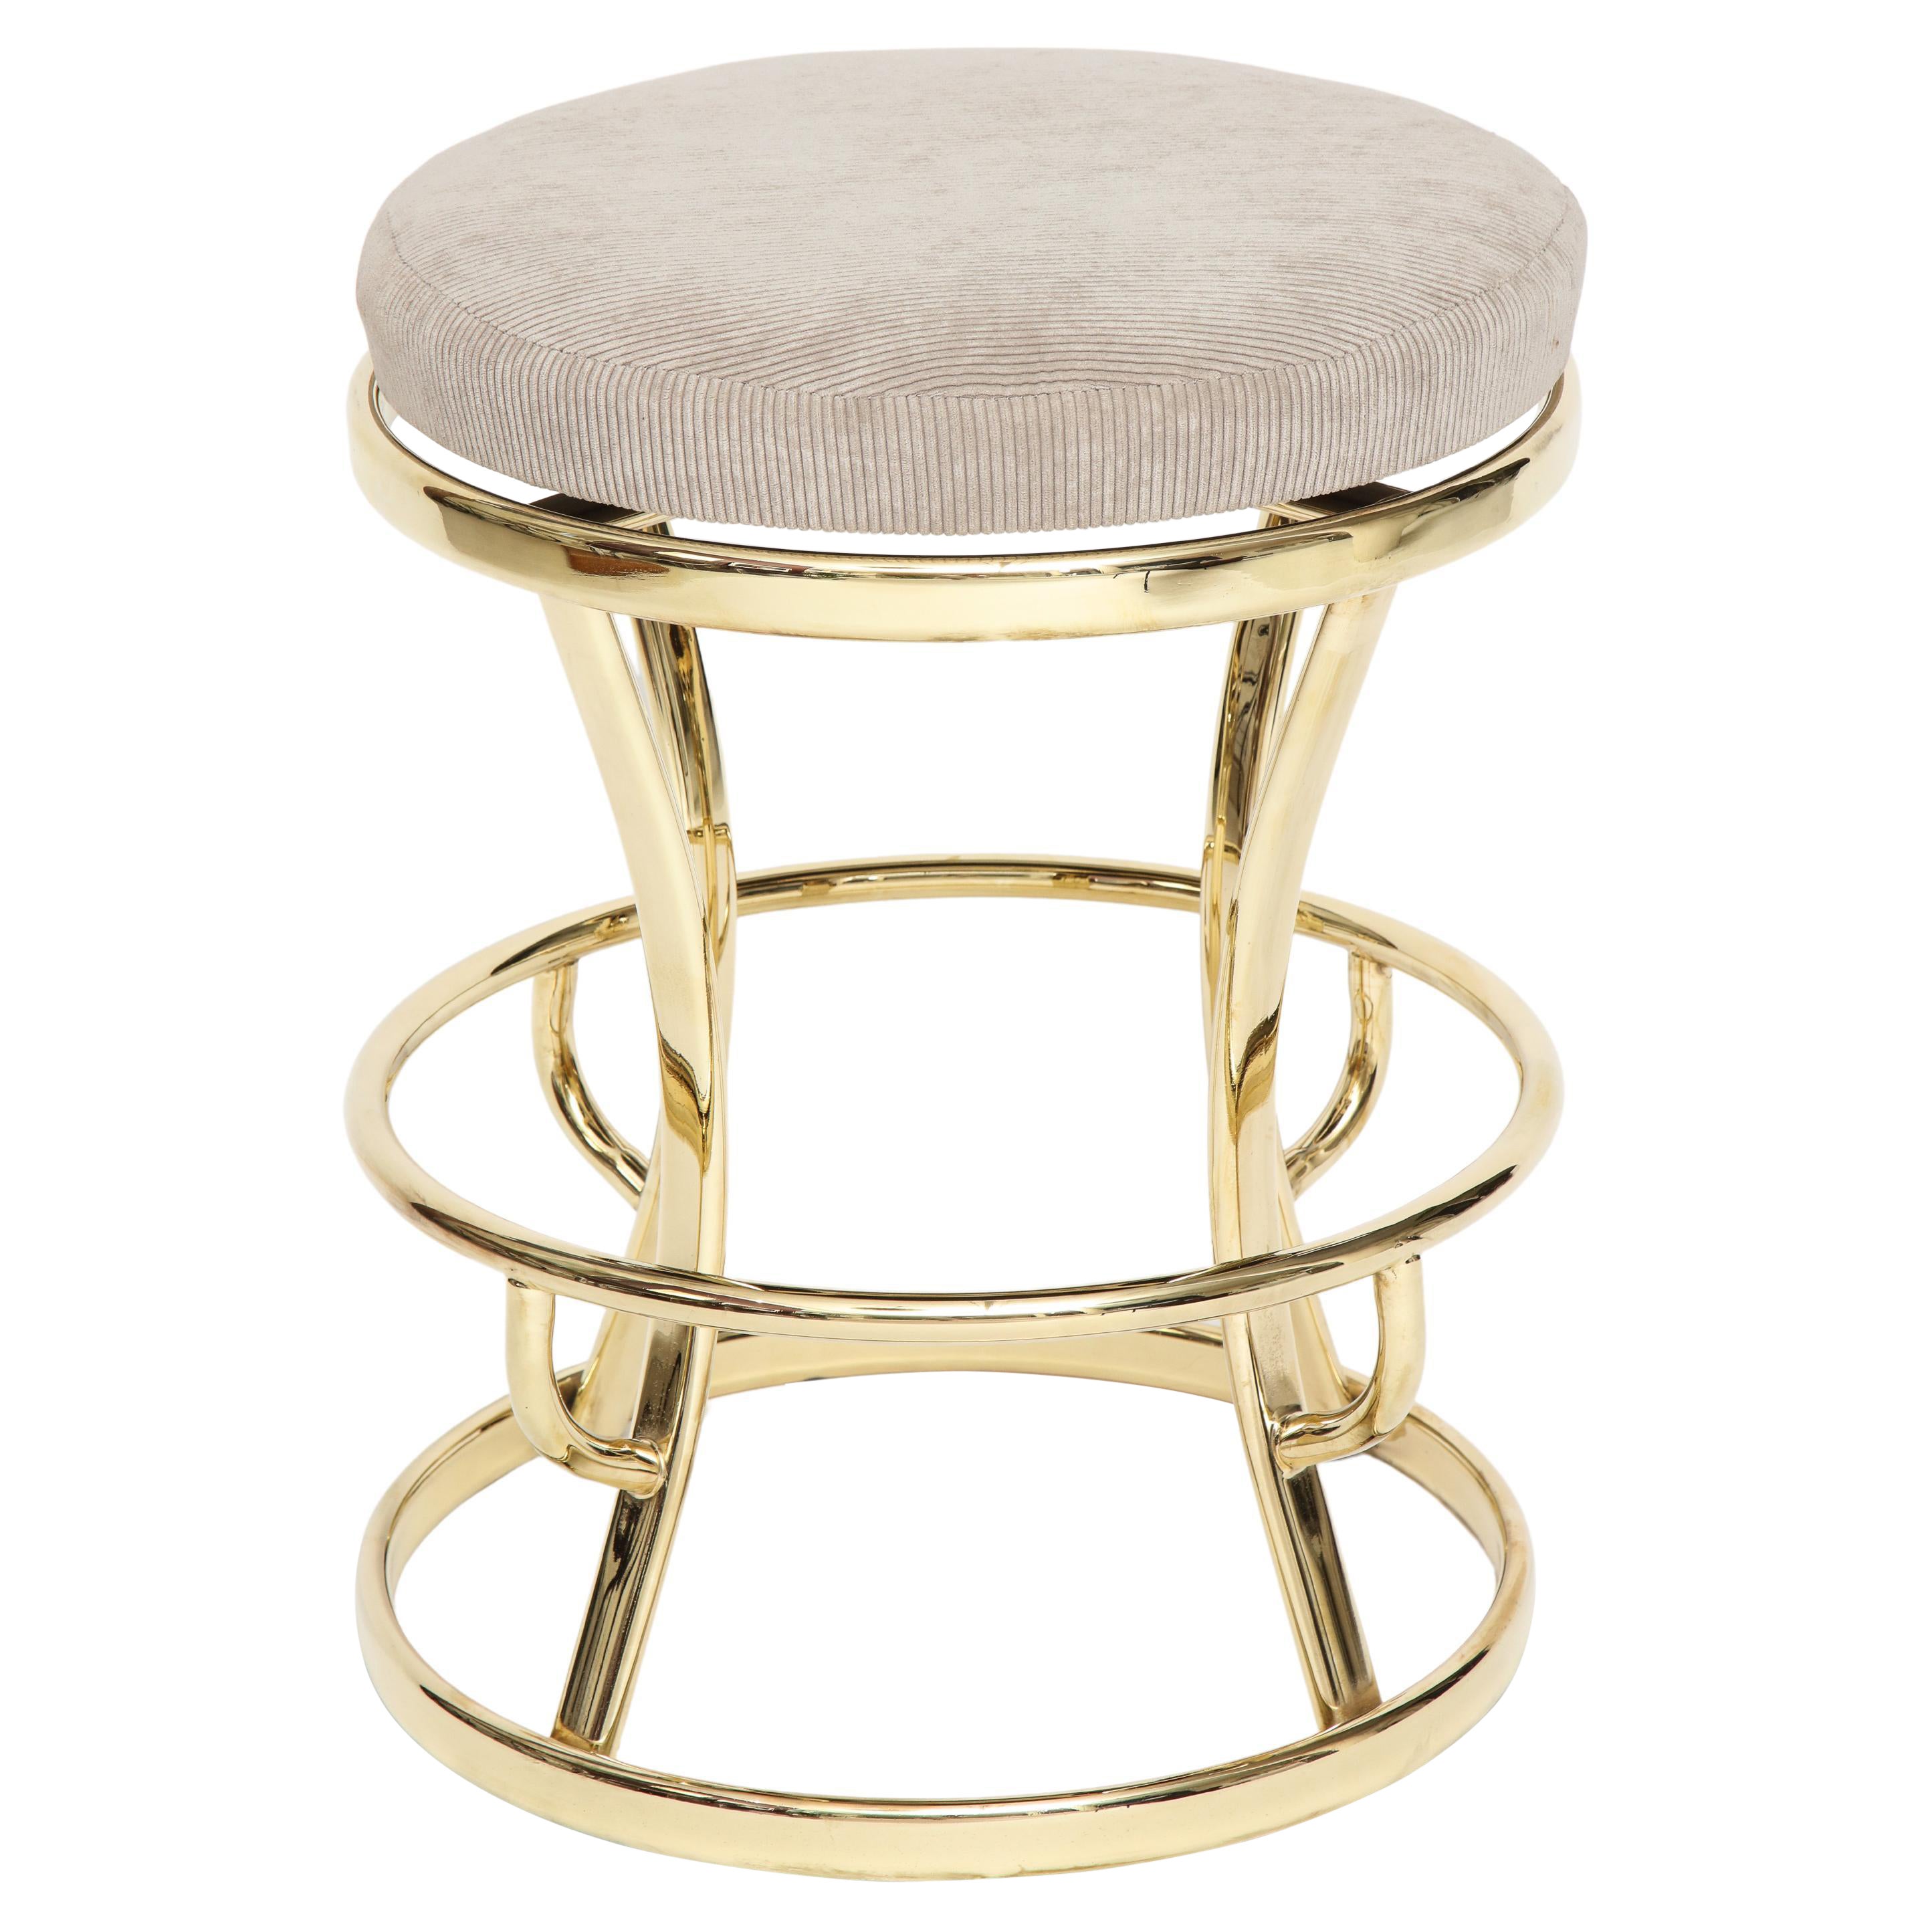 Brass and grey barstools, midcentury, France, 1970s

Beautiful restored brass barstools with grey corduroy top that swivels. Adds glamour to any room. Picture shows 6 but only 4 in this listing.